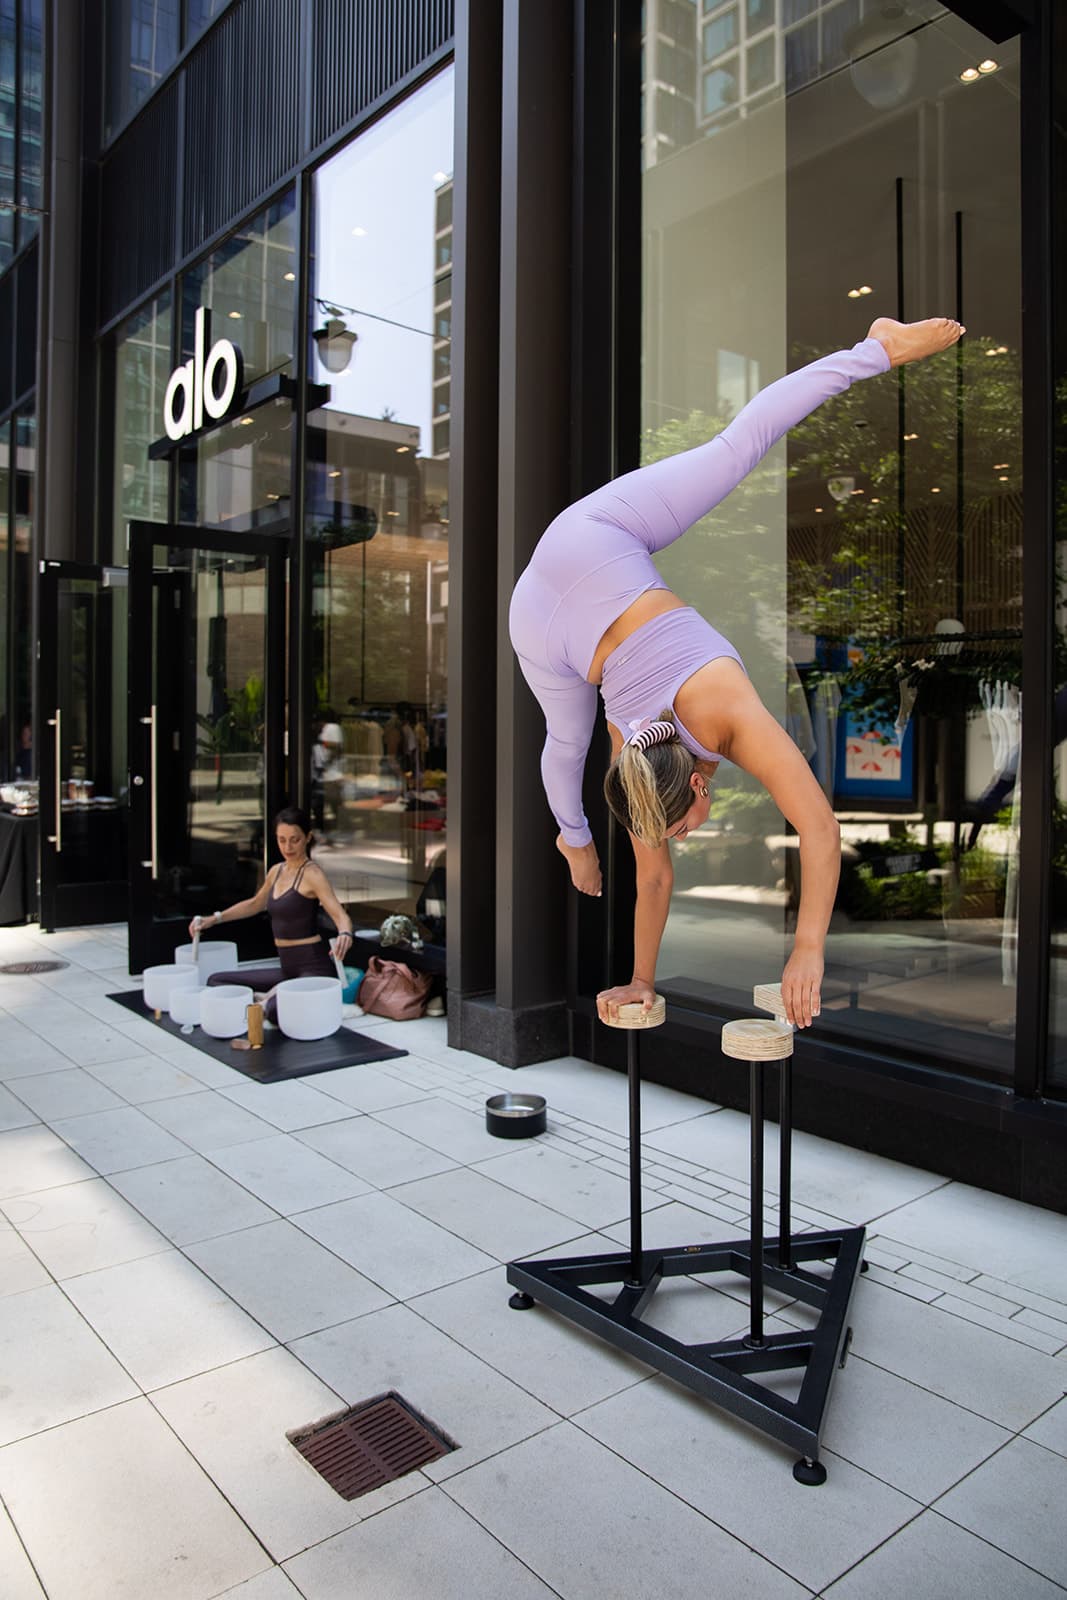 A woman doing acro yoga on two elevated blocks in front of the Alo Boston storefront with a woman in the background performing a sound bath with sound bowls.  